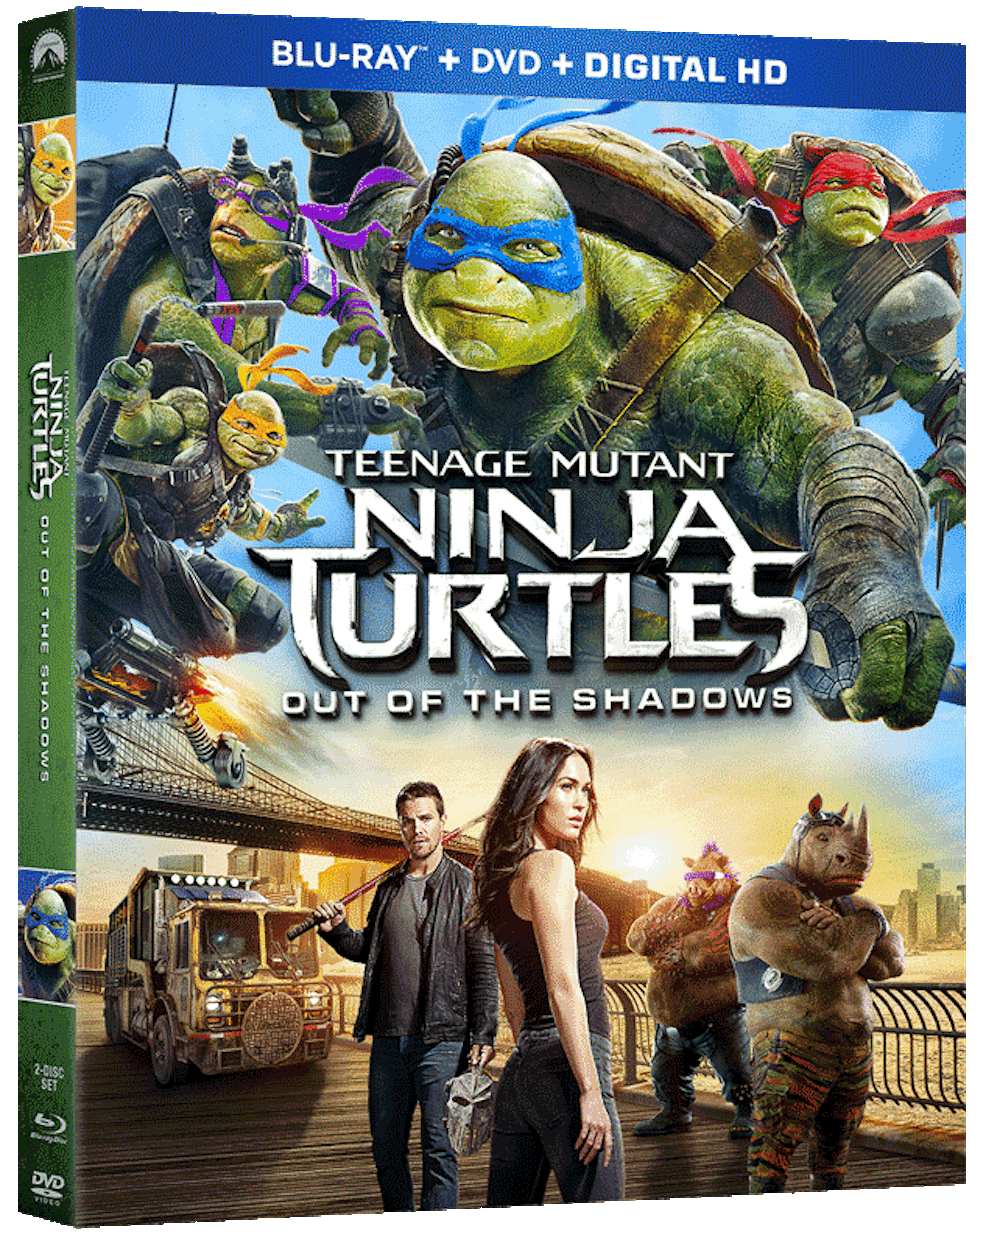 Teenage Mutant Ninja Turtles: Out of the Shadows, Paramount Pictures